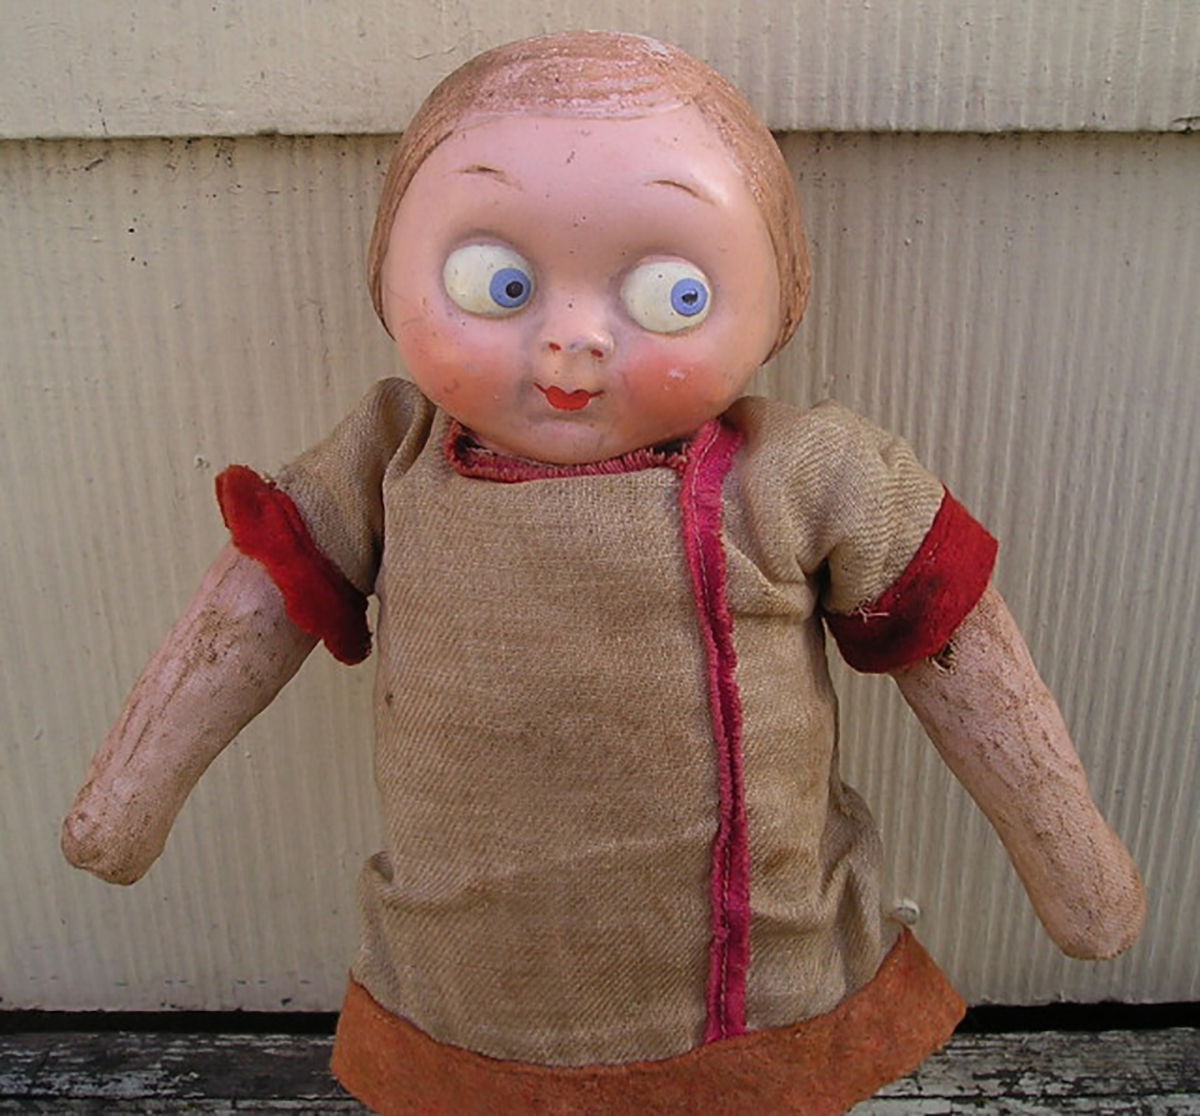 17 Toys That Are Pure Nightmare Fuel